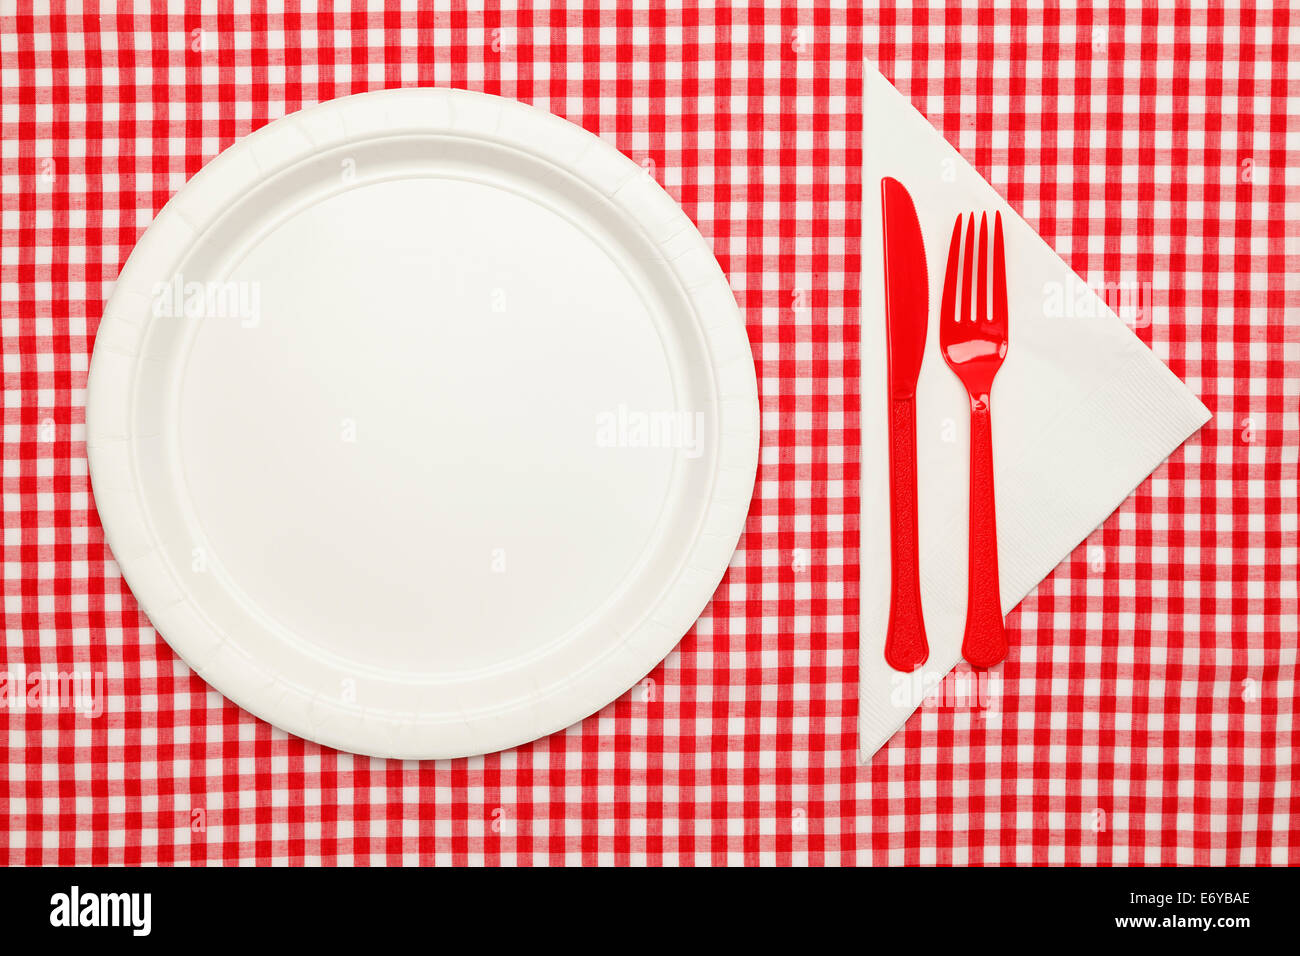 Paper Plate on Checkered Table Cloth wtih Plastic Utnesils and Napkin. Stock Photo